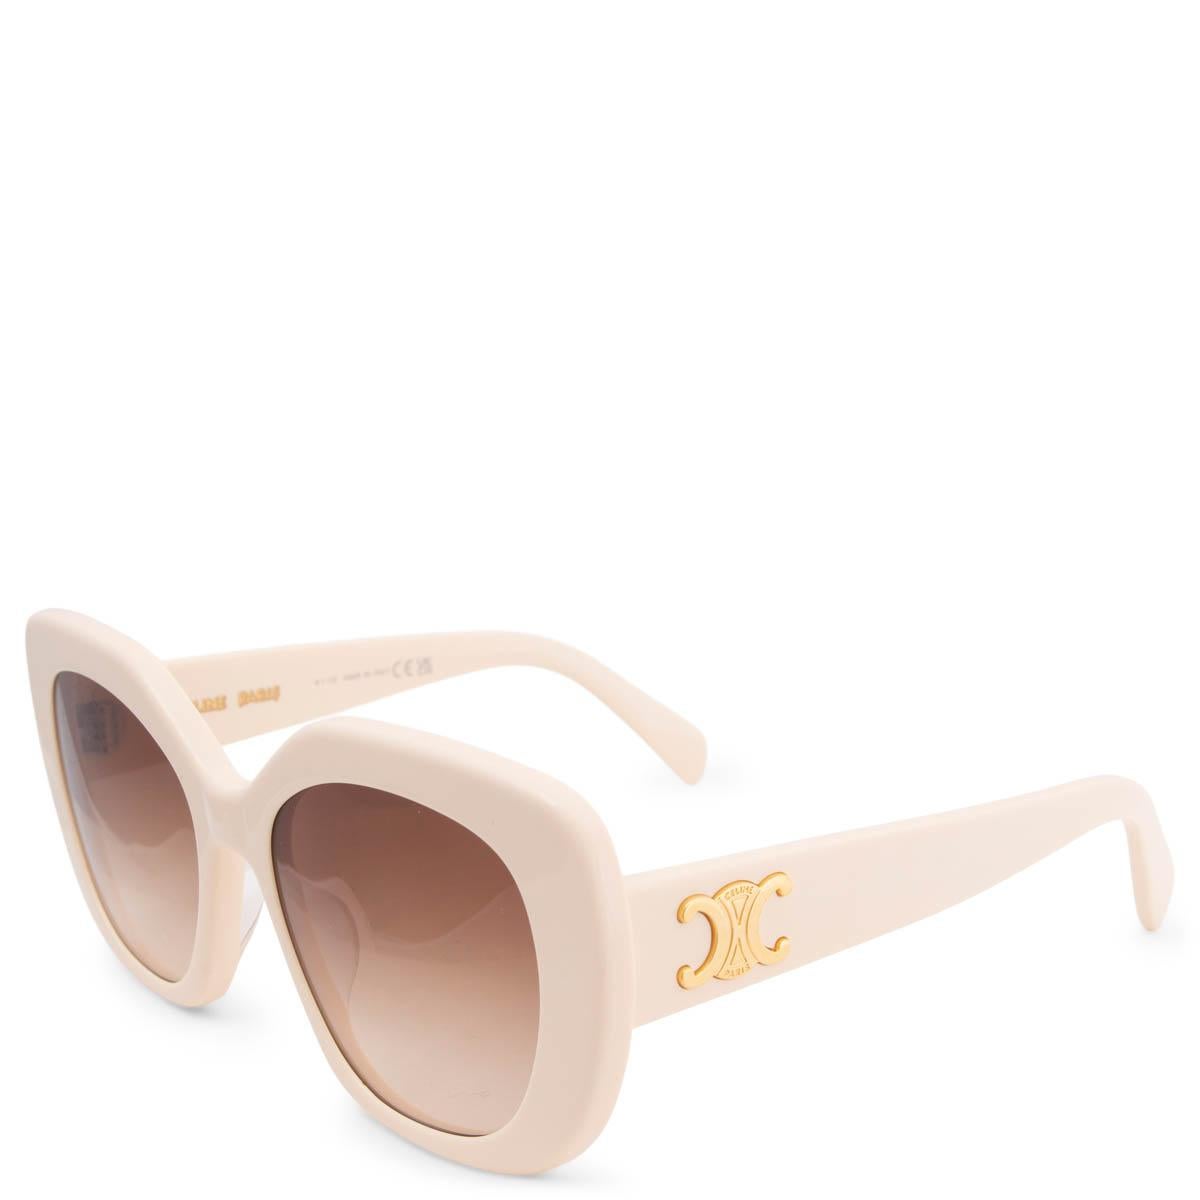 100% authentic Celine Triophme 04 CL40226U rectangular sunglasses in ivory acetate and brown gradient lenses. Gold-Tone Triomphe signature on temples. Have been worn and are in excellent condition. Come with case. 

Measurements
Model	CL40226U